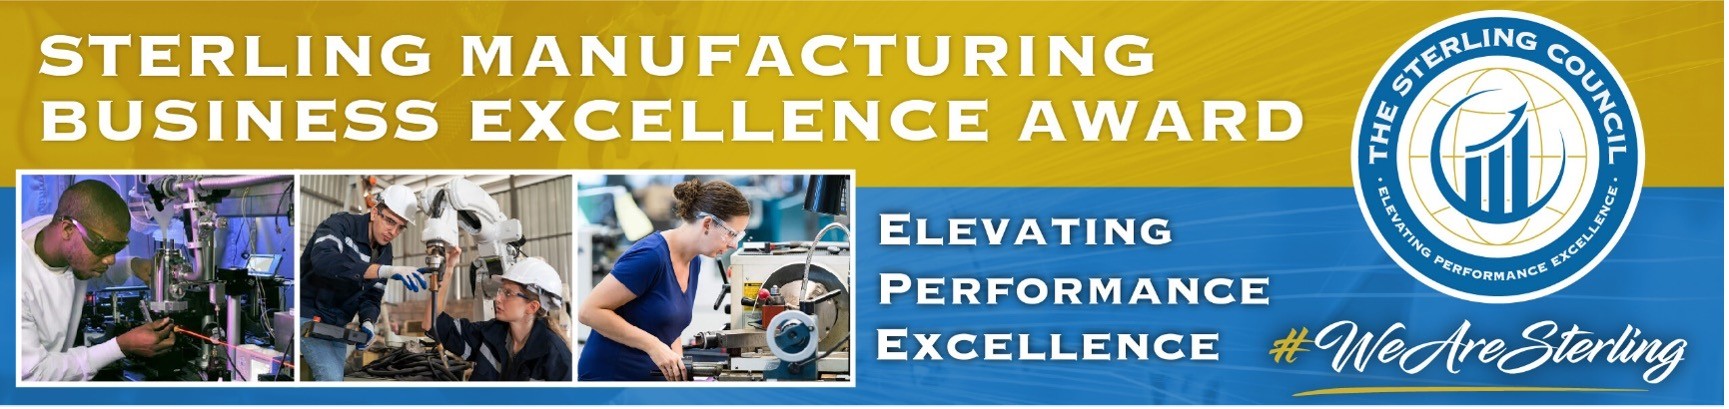 Sterling Manufacturing Business Excellence Award